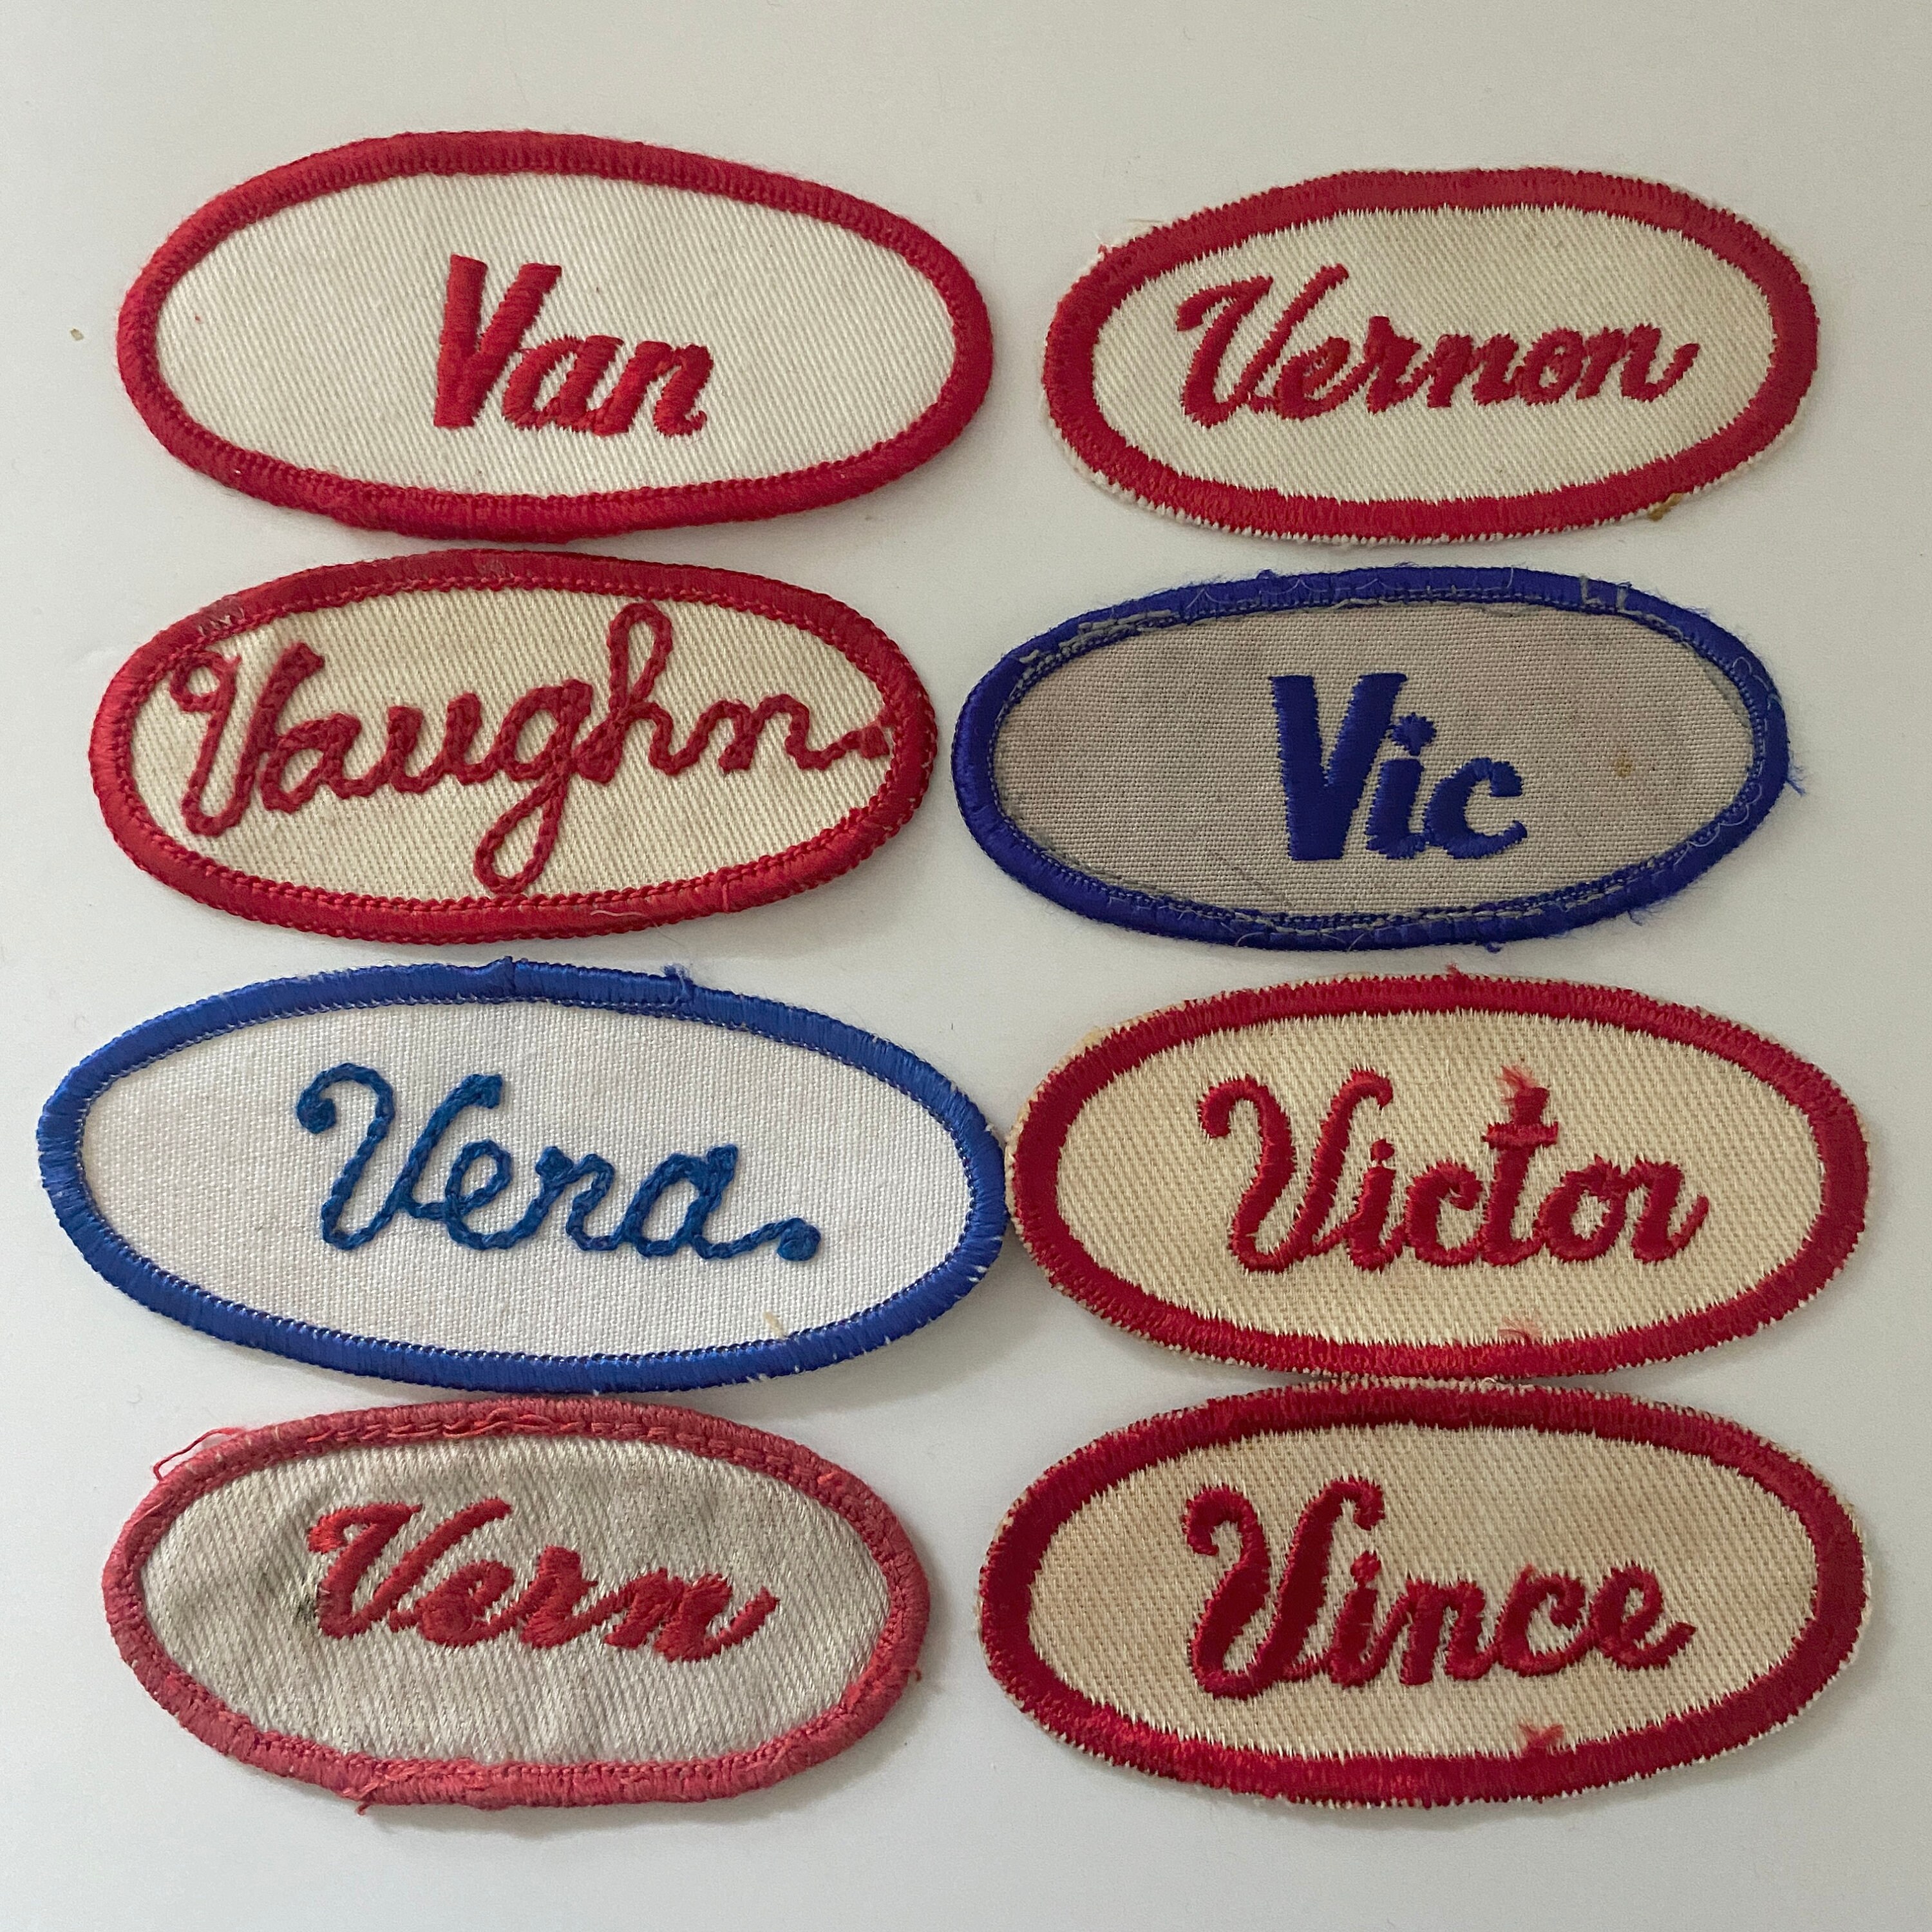 Assortment Lot Vintage Name Patches Randomly Chosen Industrial Work Shirt Name  Patch Uniform Altered Art Craft Projects Vintage Supply 